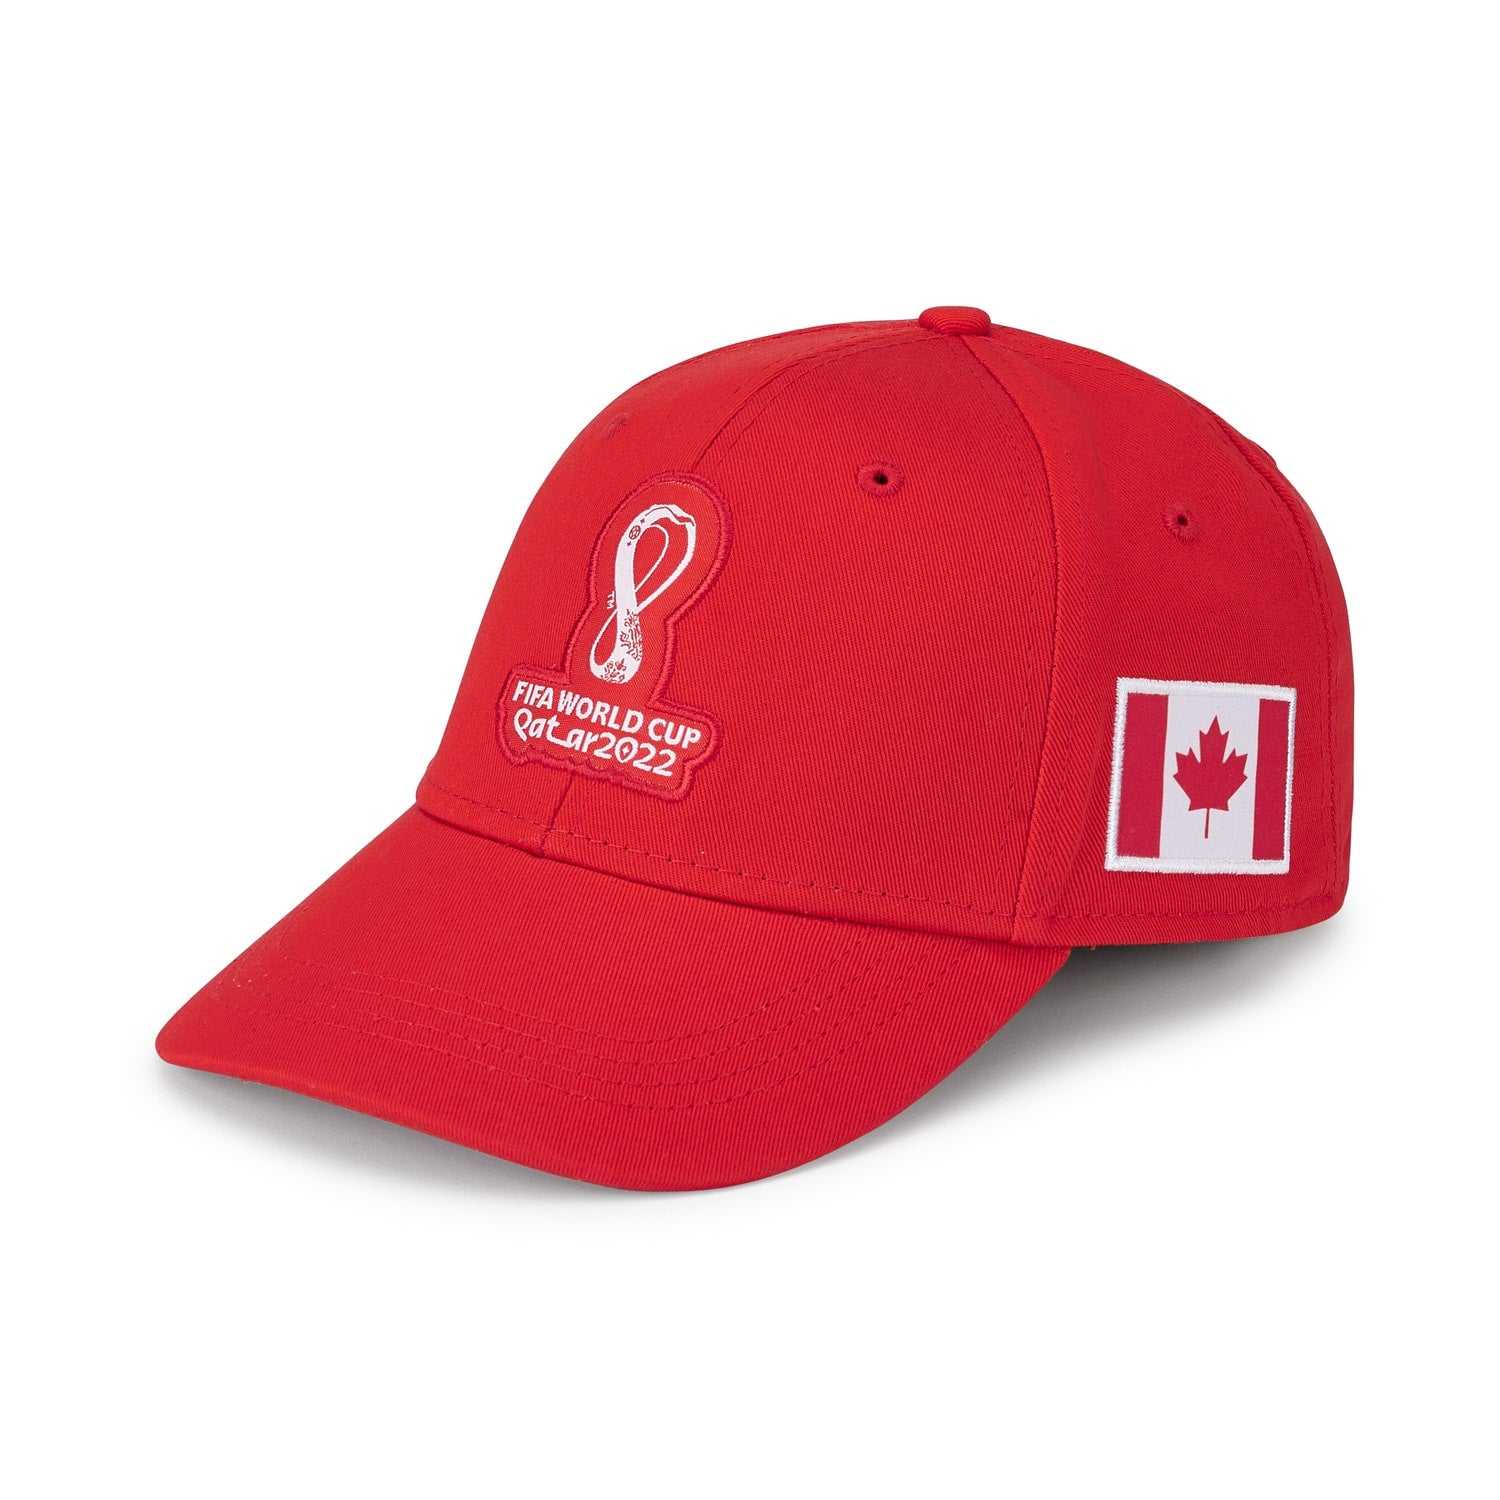 2022 World Cup Canada Red Cap - Mens